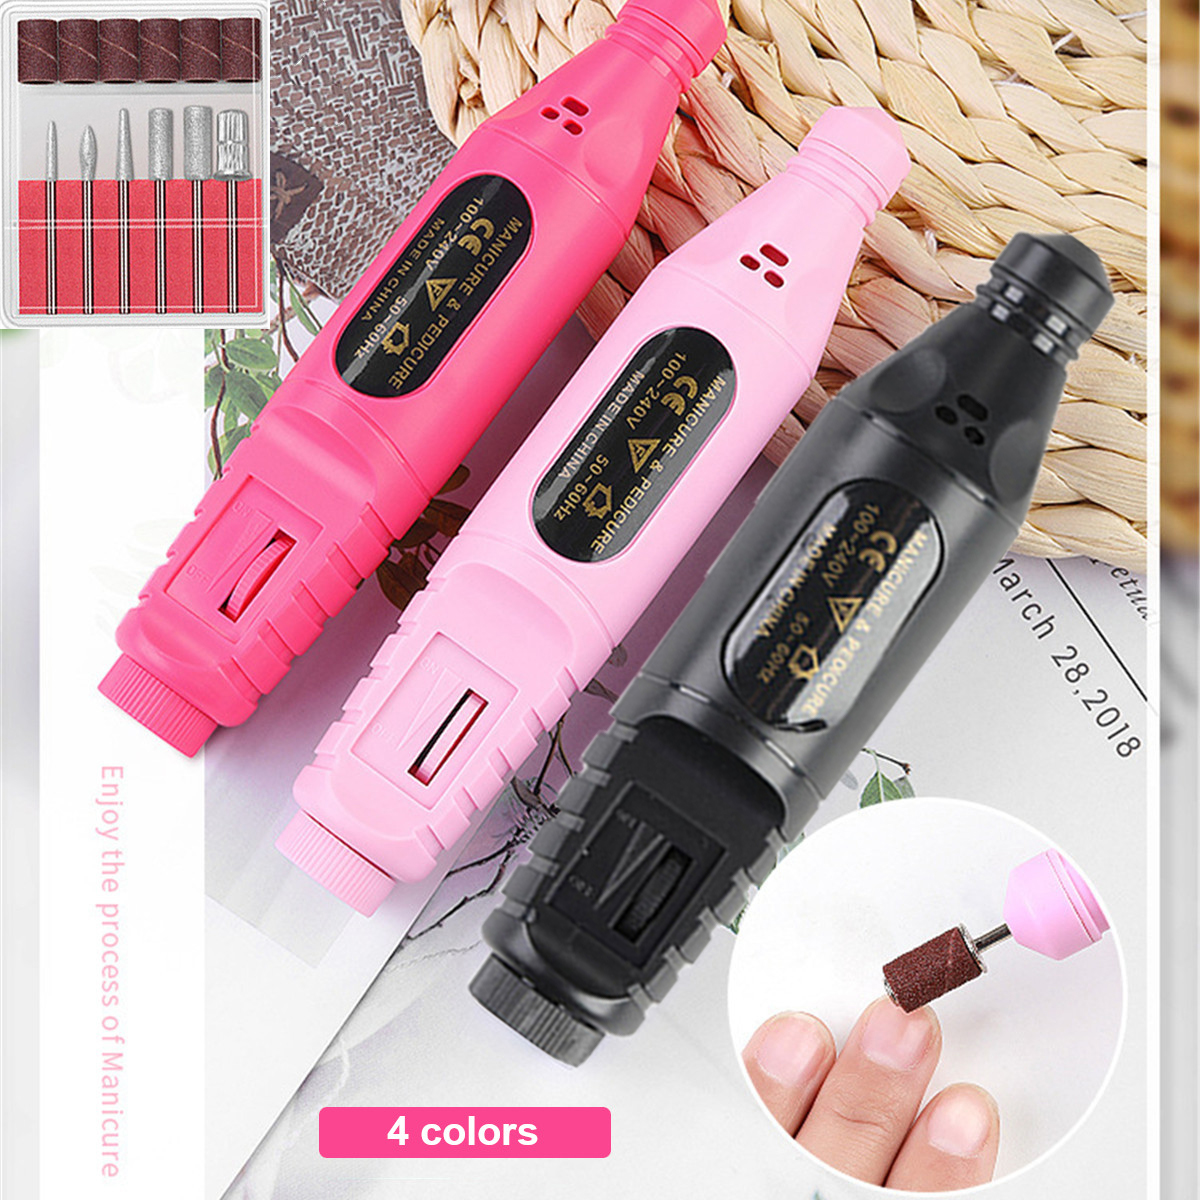 Mini-Electric-Drill-Grinder-Set-Variable-Speed-Rotary-Polishing-Carving-Tool-USB-Charging-Manicure-T-1942955-2